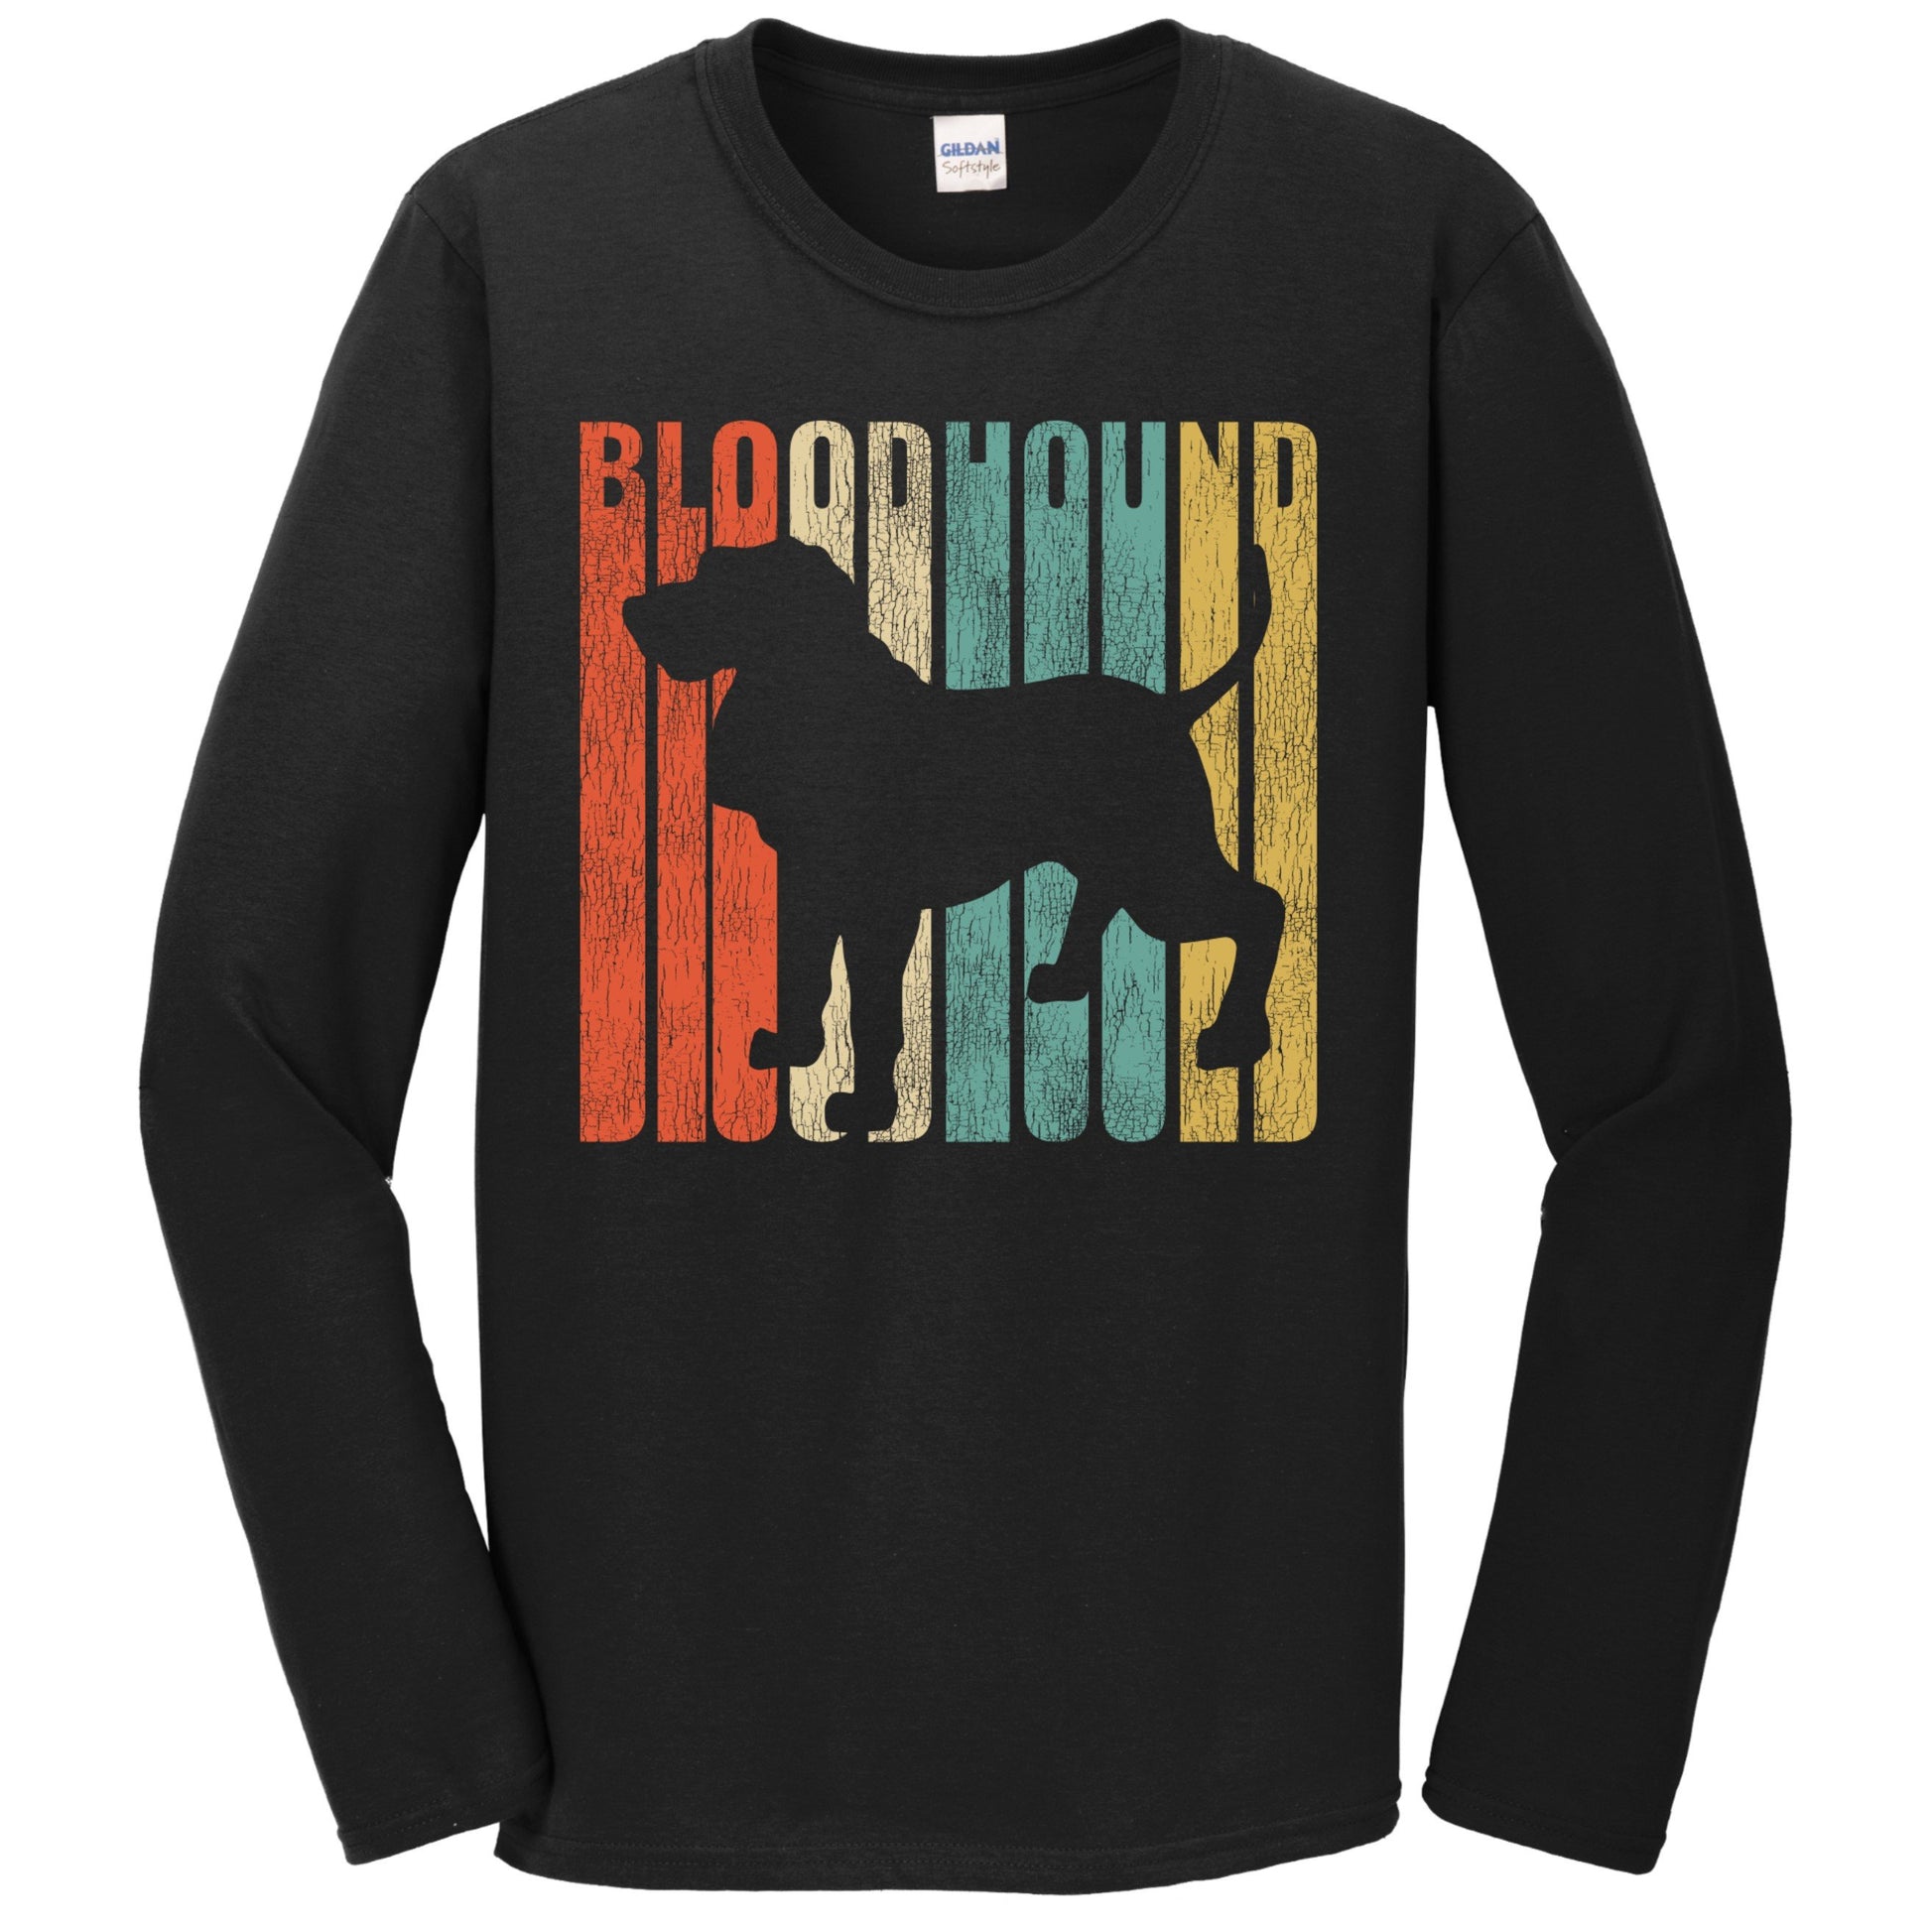 Retro 1970's Style Bloodhound Dog Silhouette Cracked Distressed Long Sleeve T-Shirt